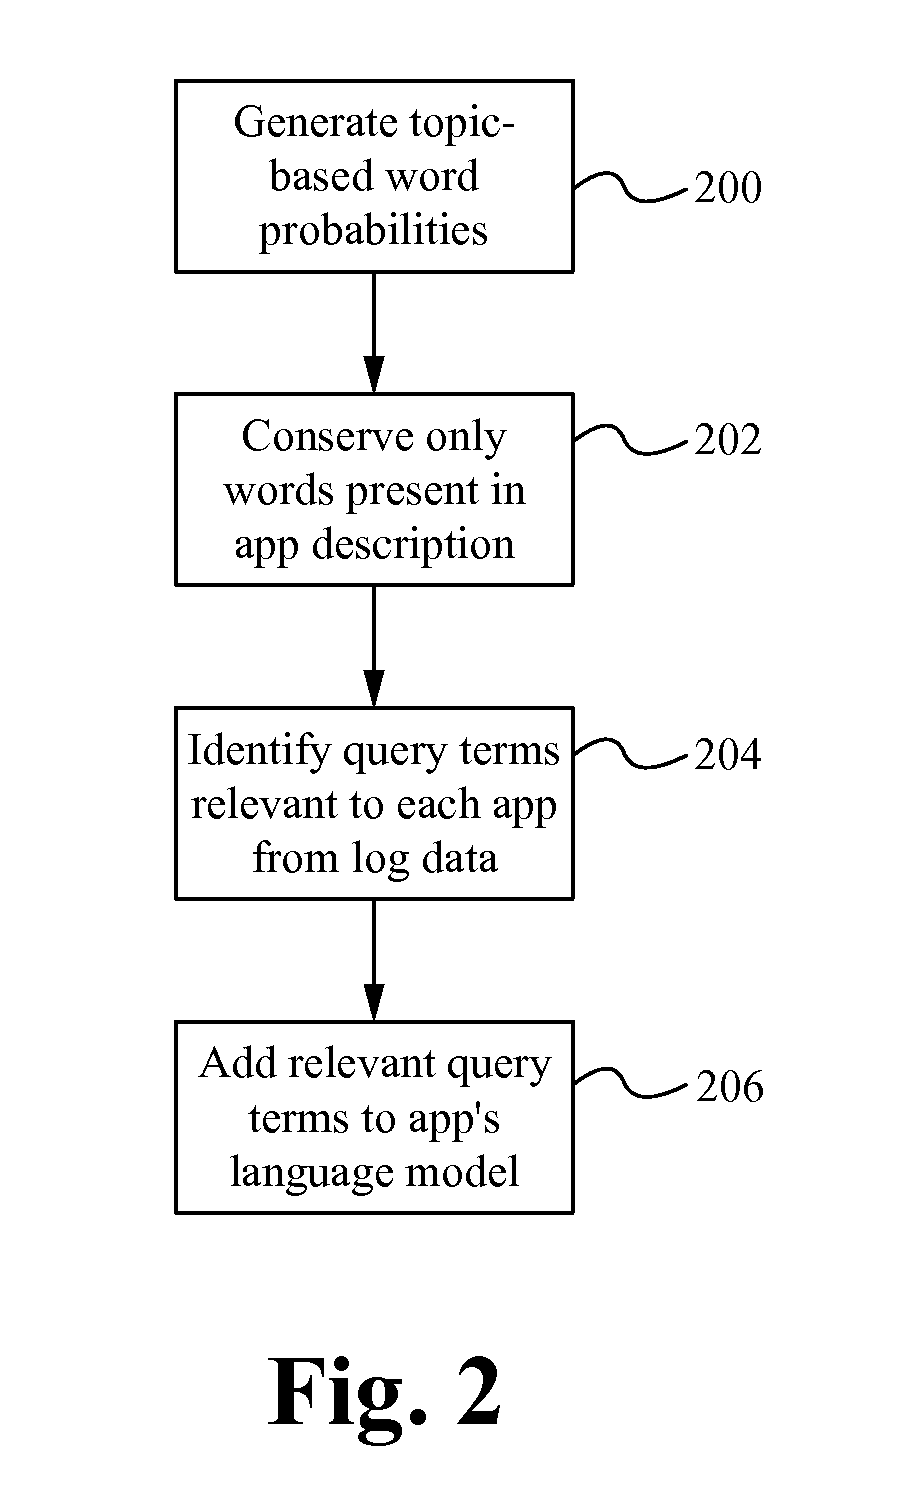 Generation of topic-based language models for an app search engine